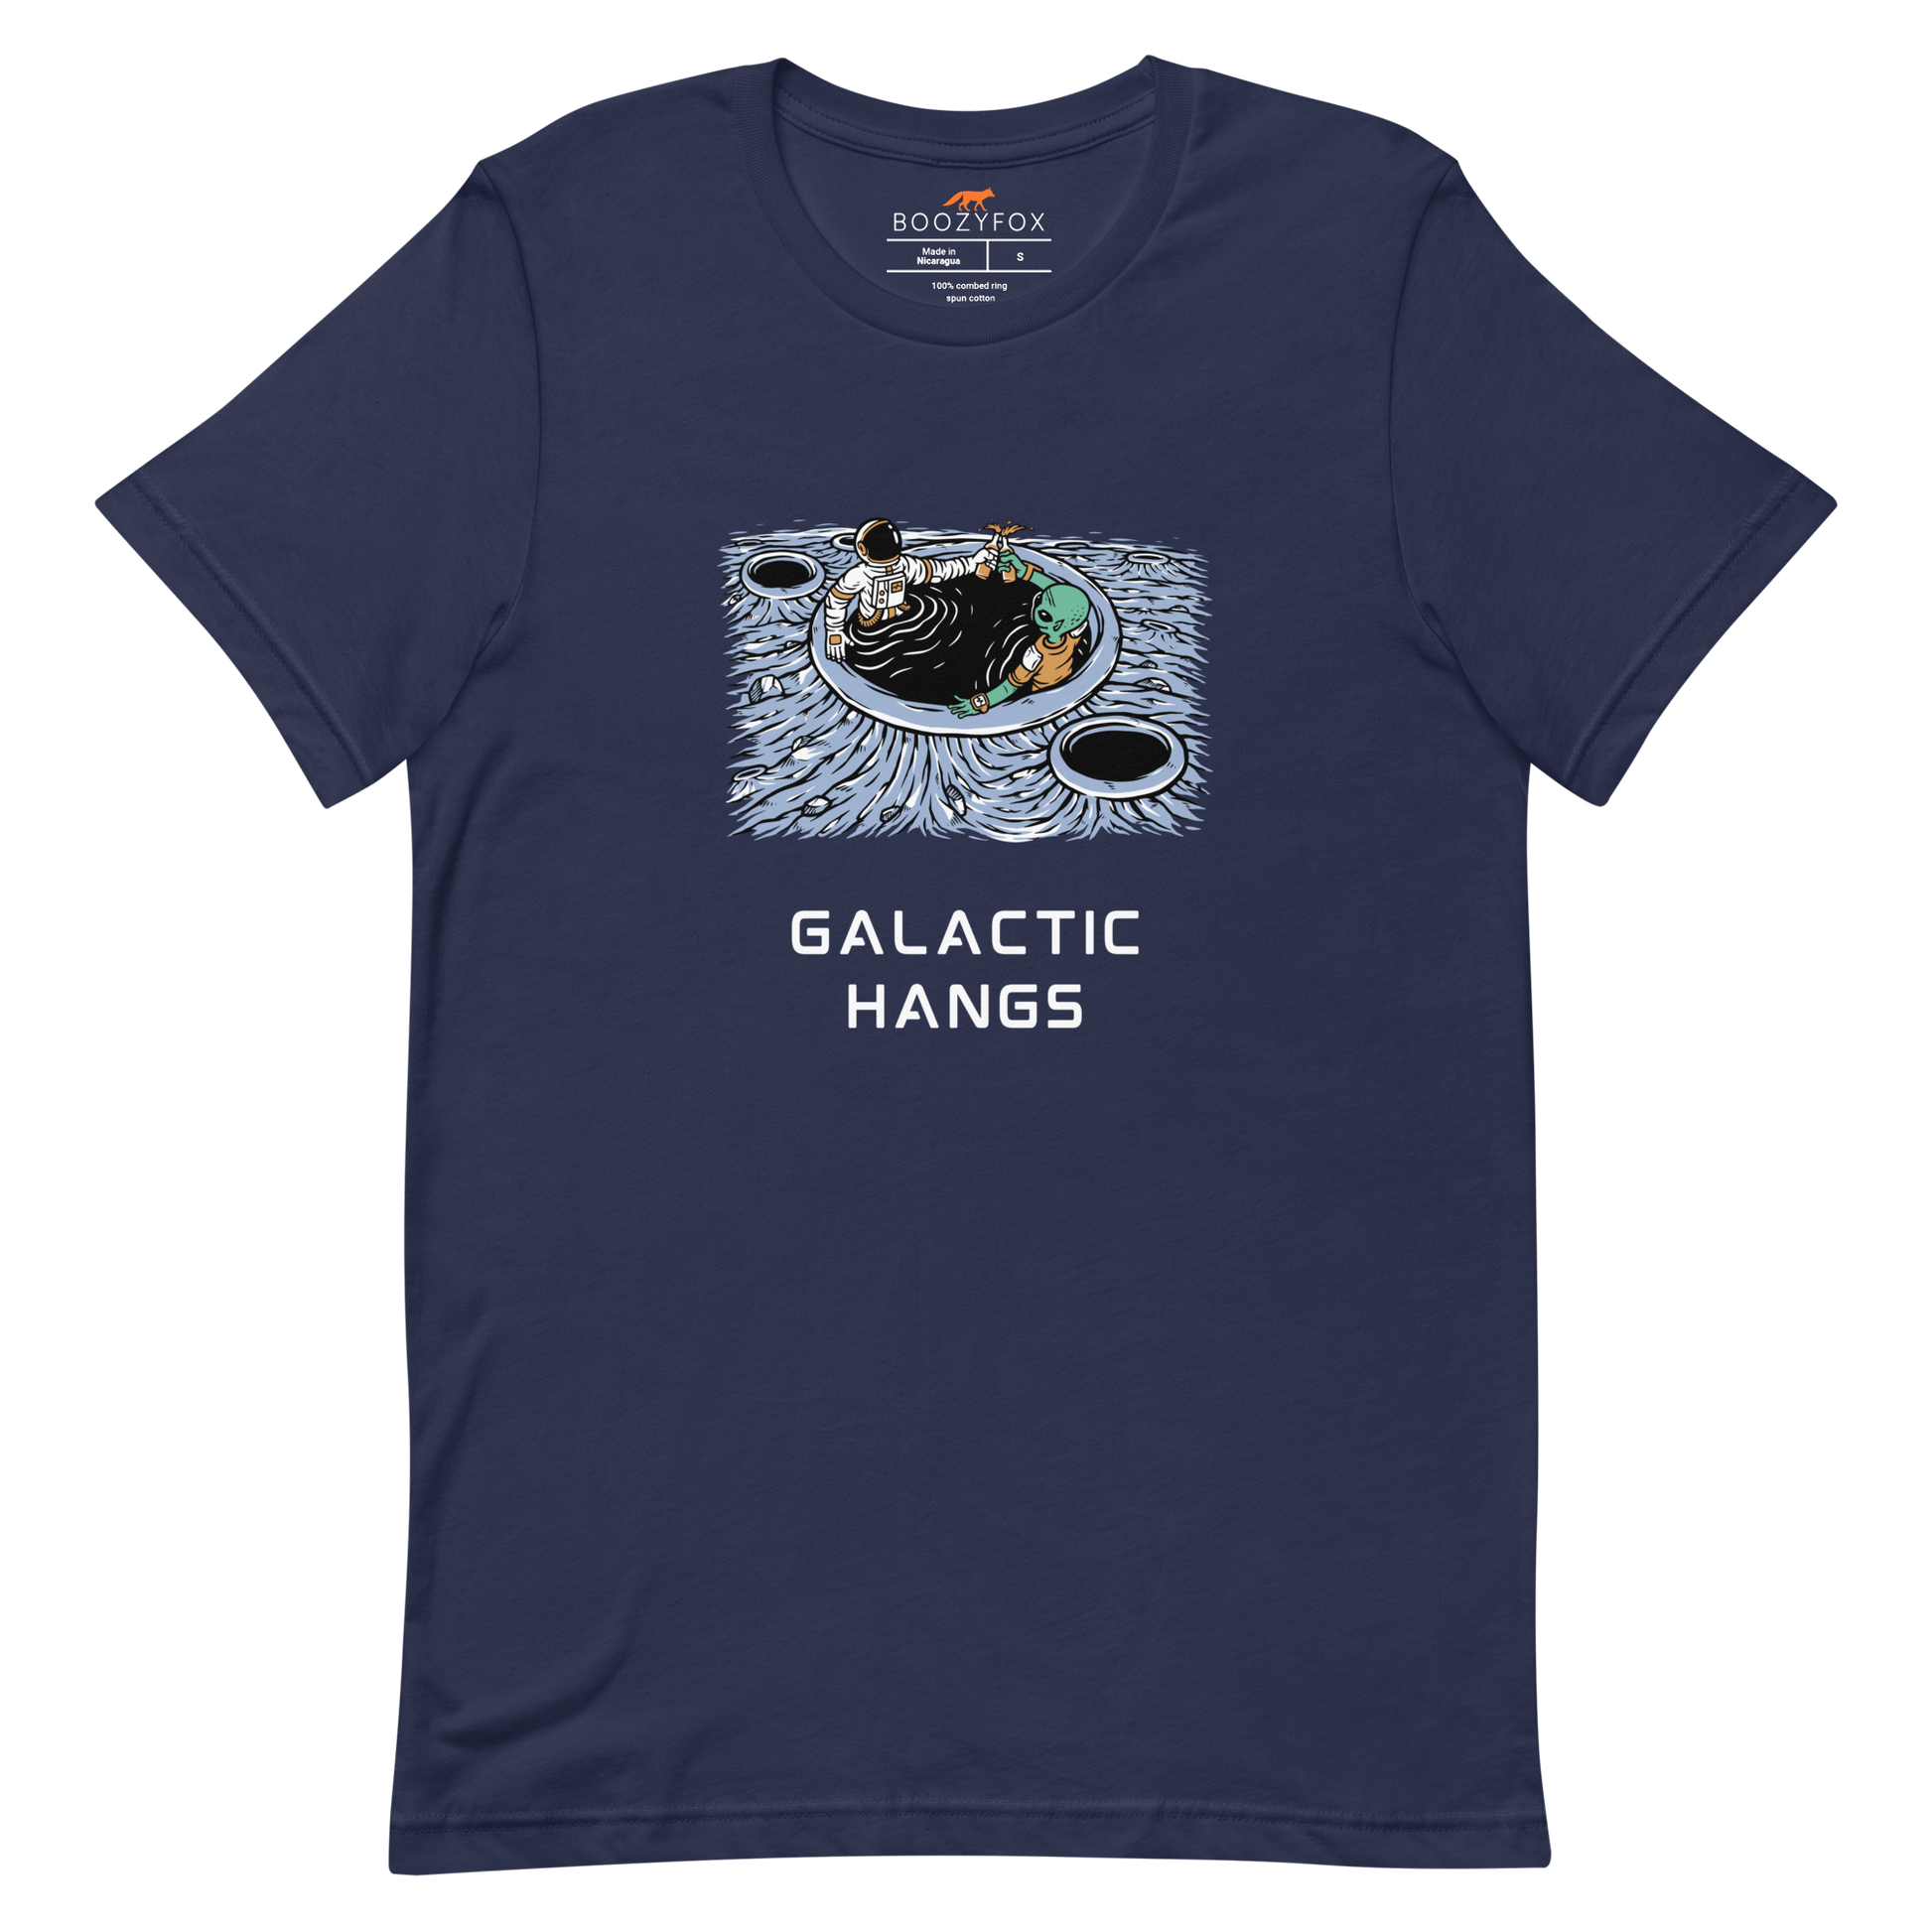 Navy Premium Galactic Hangs Tee featuring an out-of-this-world graphic of an Astronaut and Alien Chilling Together - Funny Graphic Space Tees - Boozy Fox